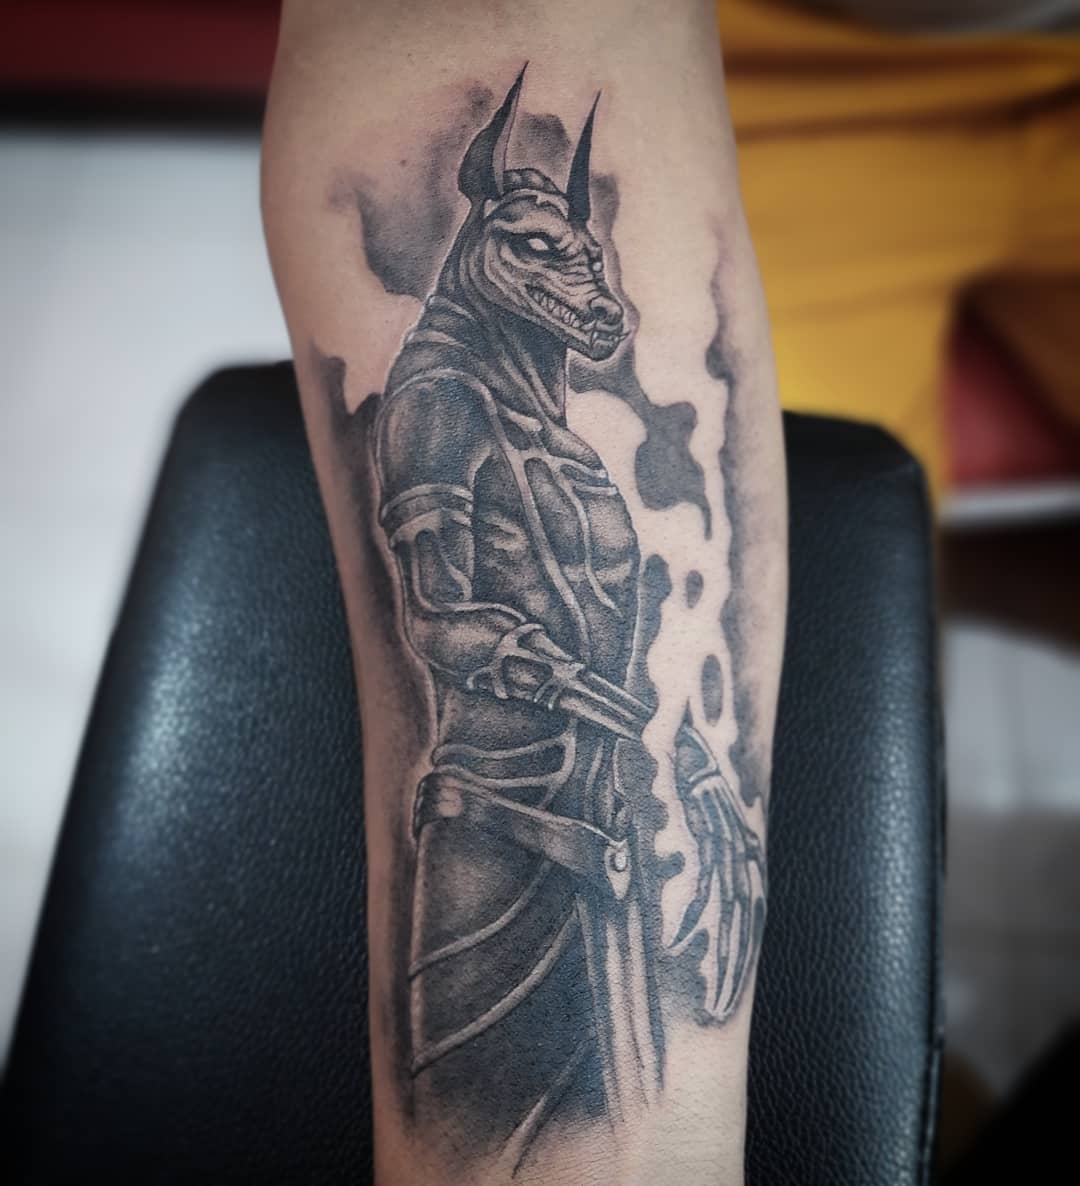  Let your tattoo show the afterlife where Anubis roams.